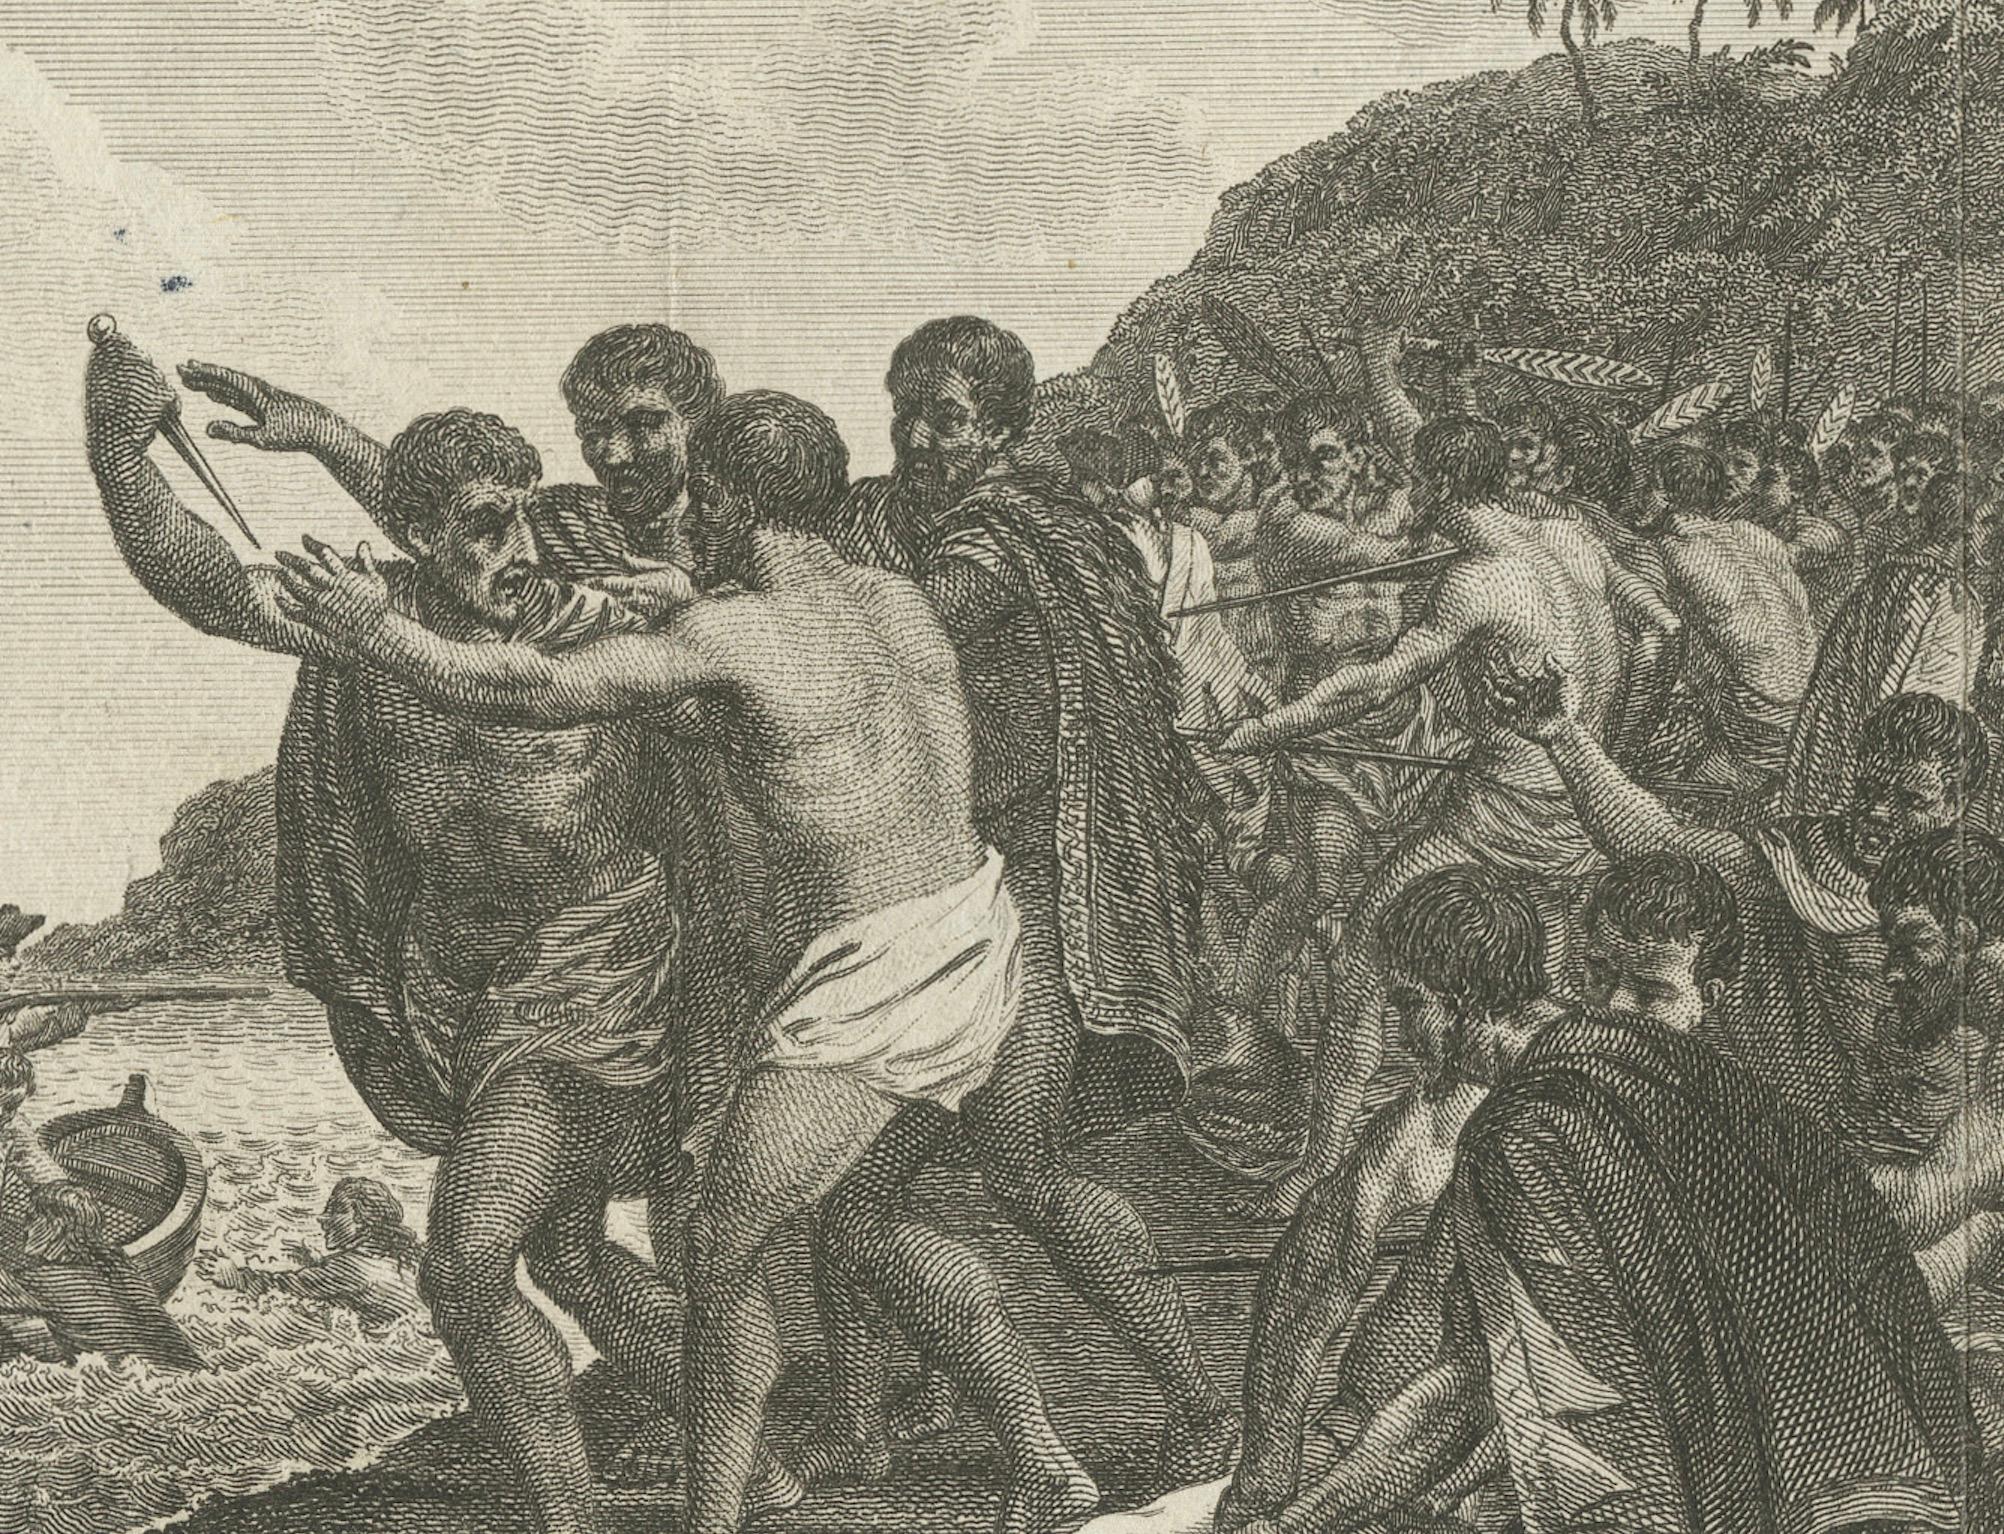 Engraved Engraving of The Death of Captain James Cook at Kealakekua Bay, Hawaii, 1784 For Sale